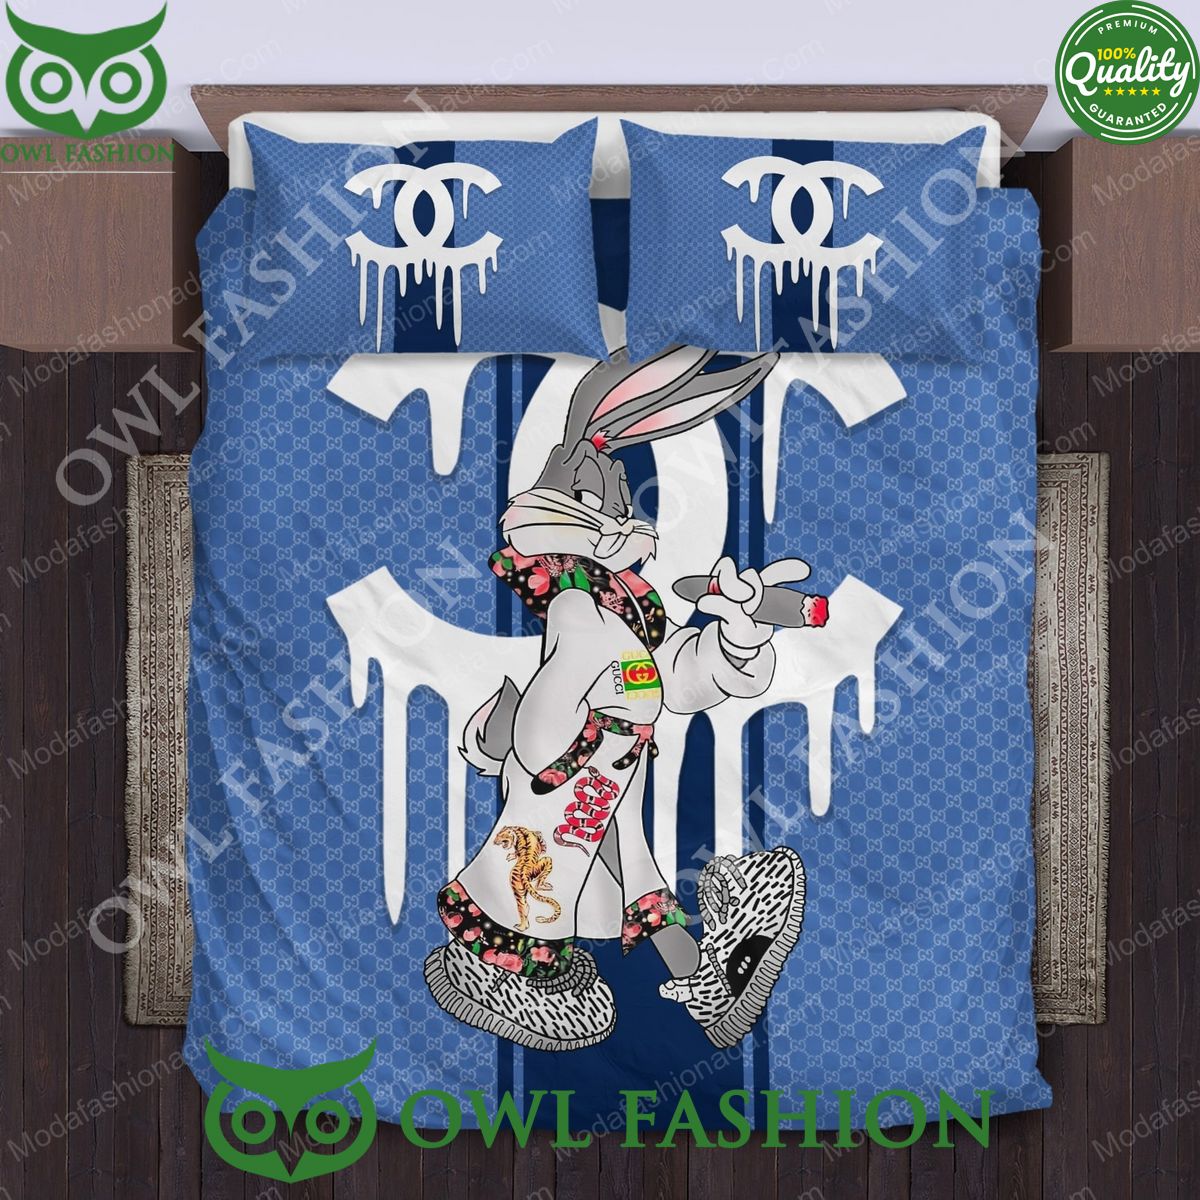 Bugs Bunny Gucci Snakes Logo Bedding Sets You look too weak